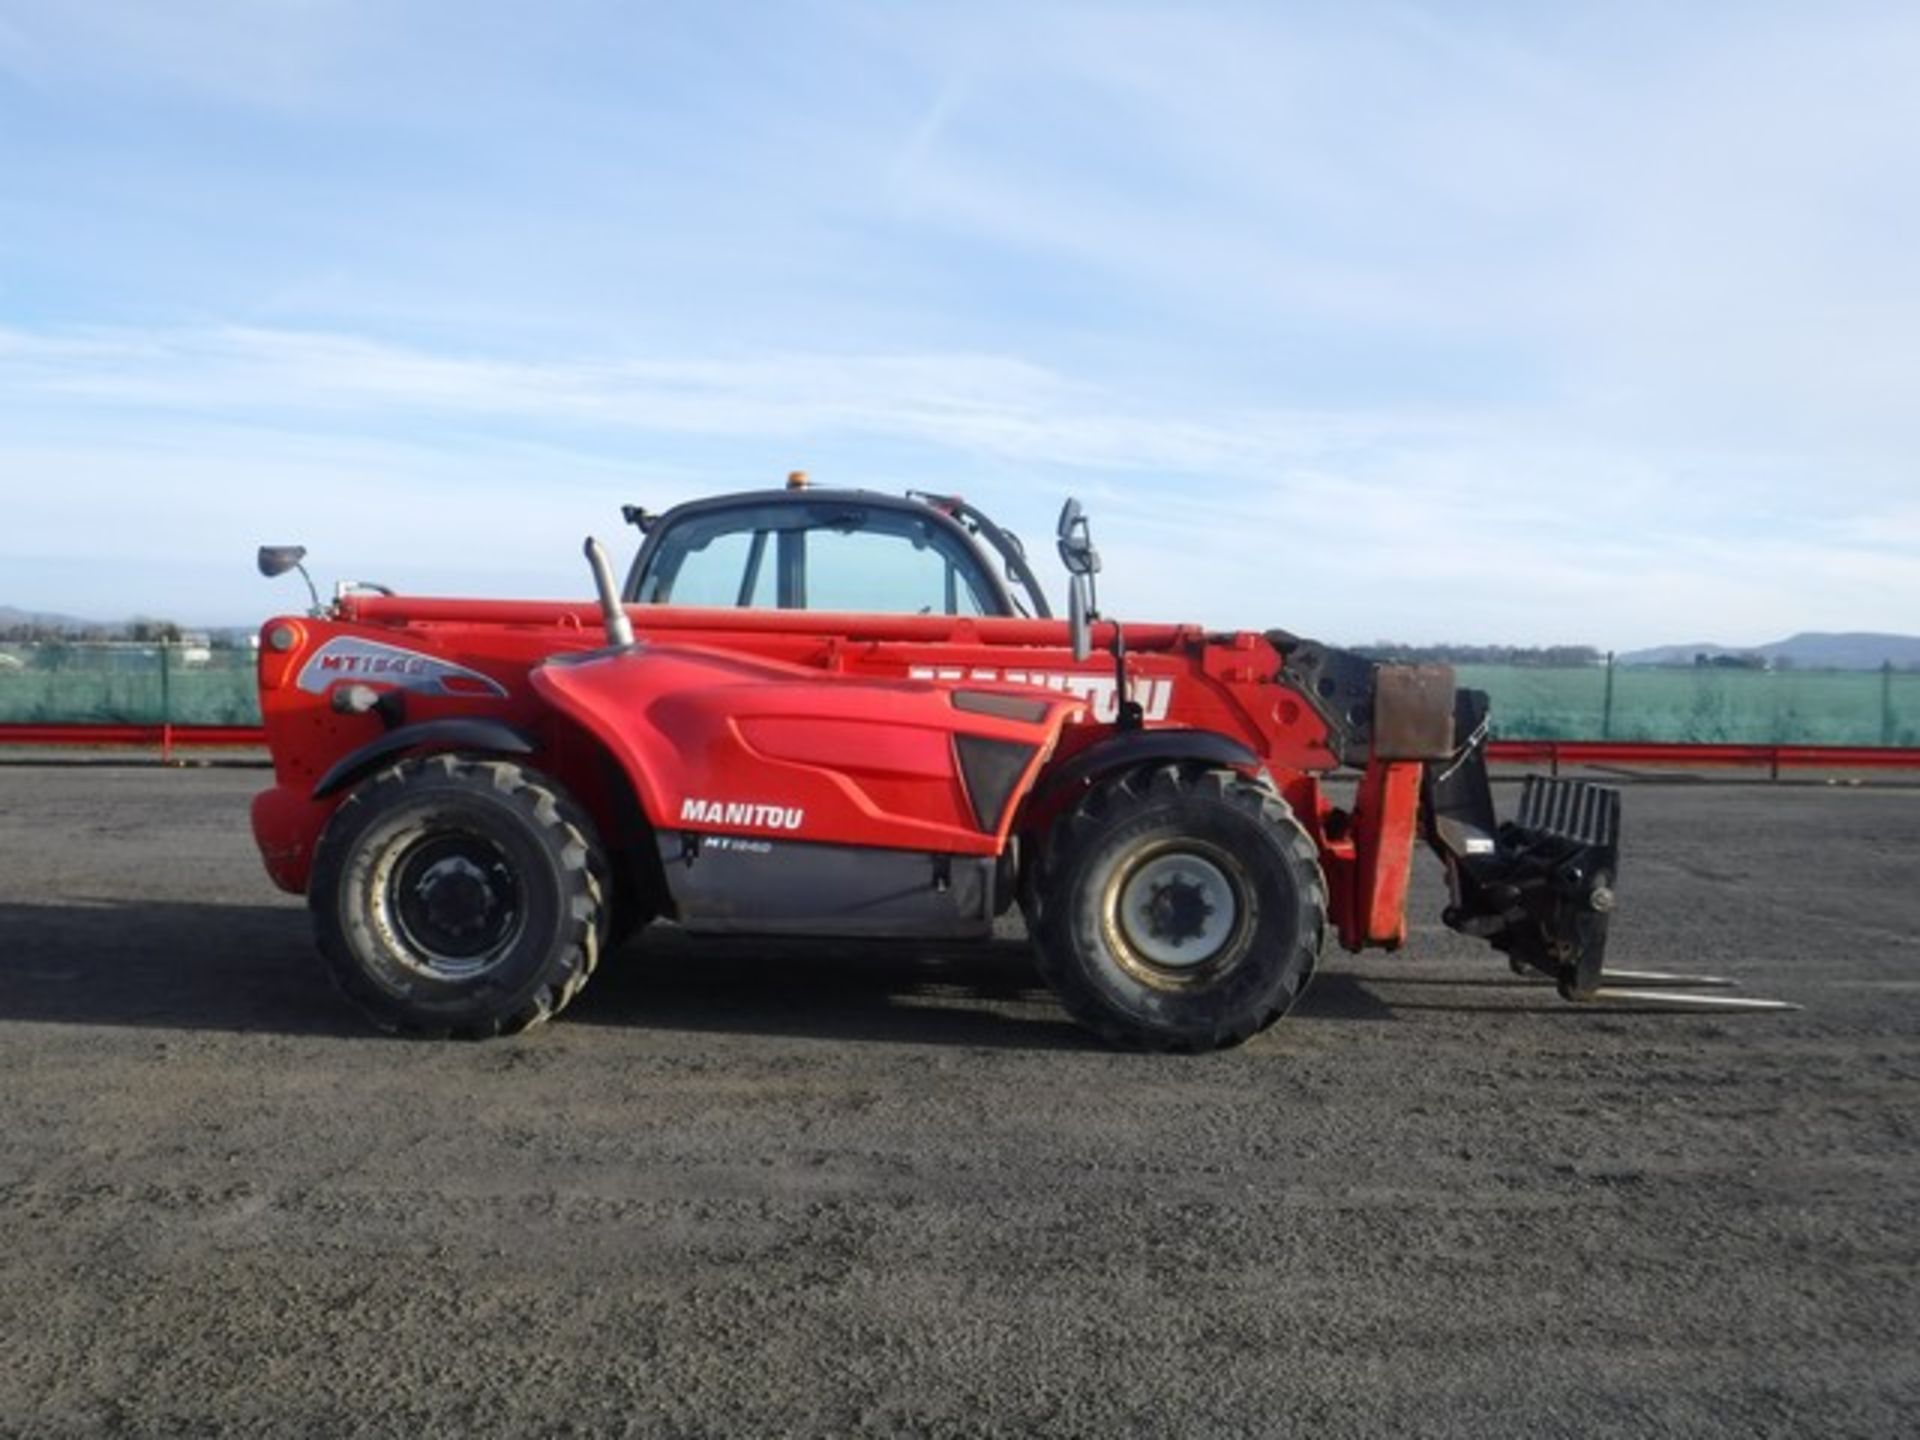 2012 MANITOU MT1840 telehandler c/w pallet forks. CE marked. Lift capacity 4000kg. Max reach 18m. Re - Image 5 of 12